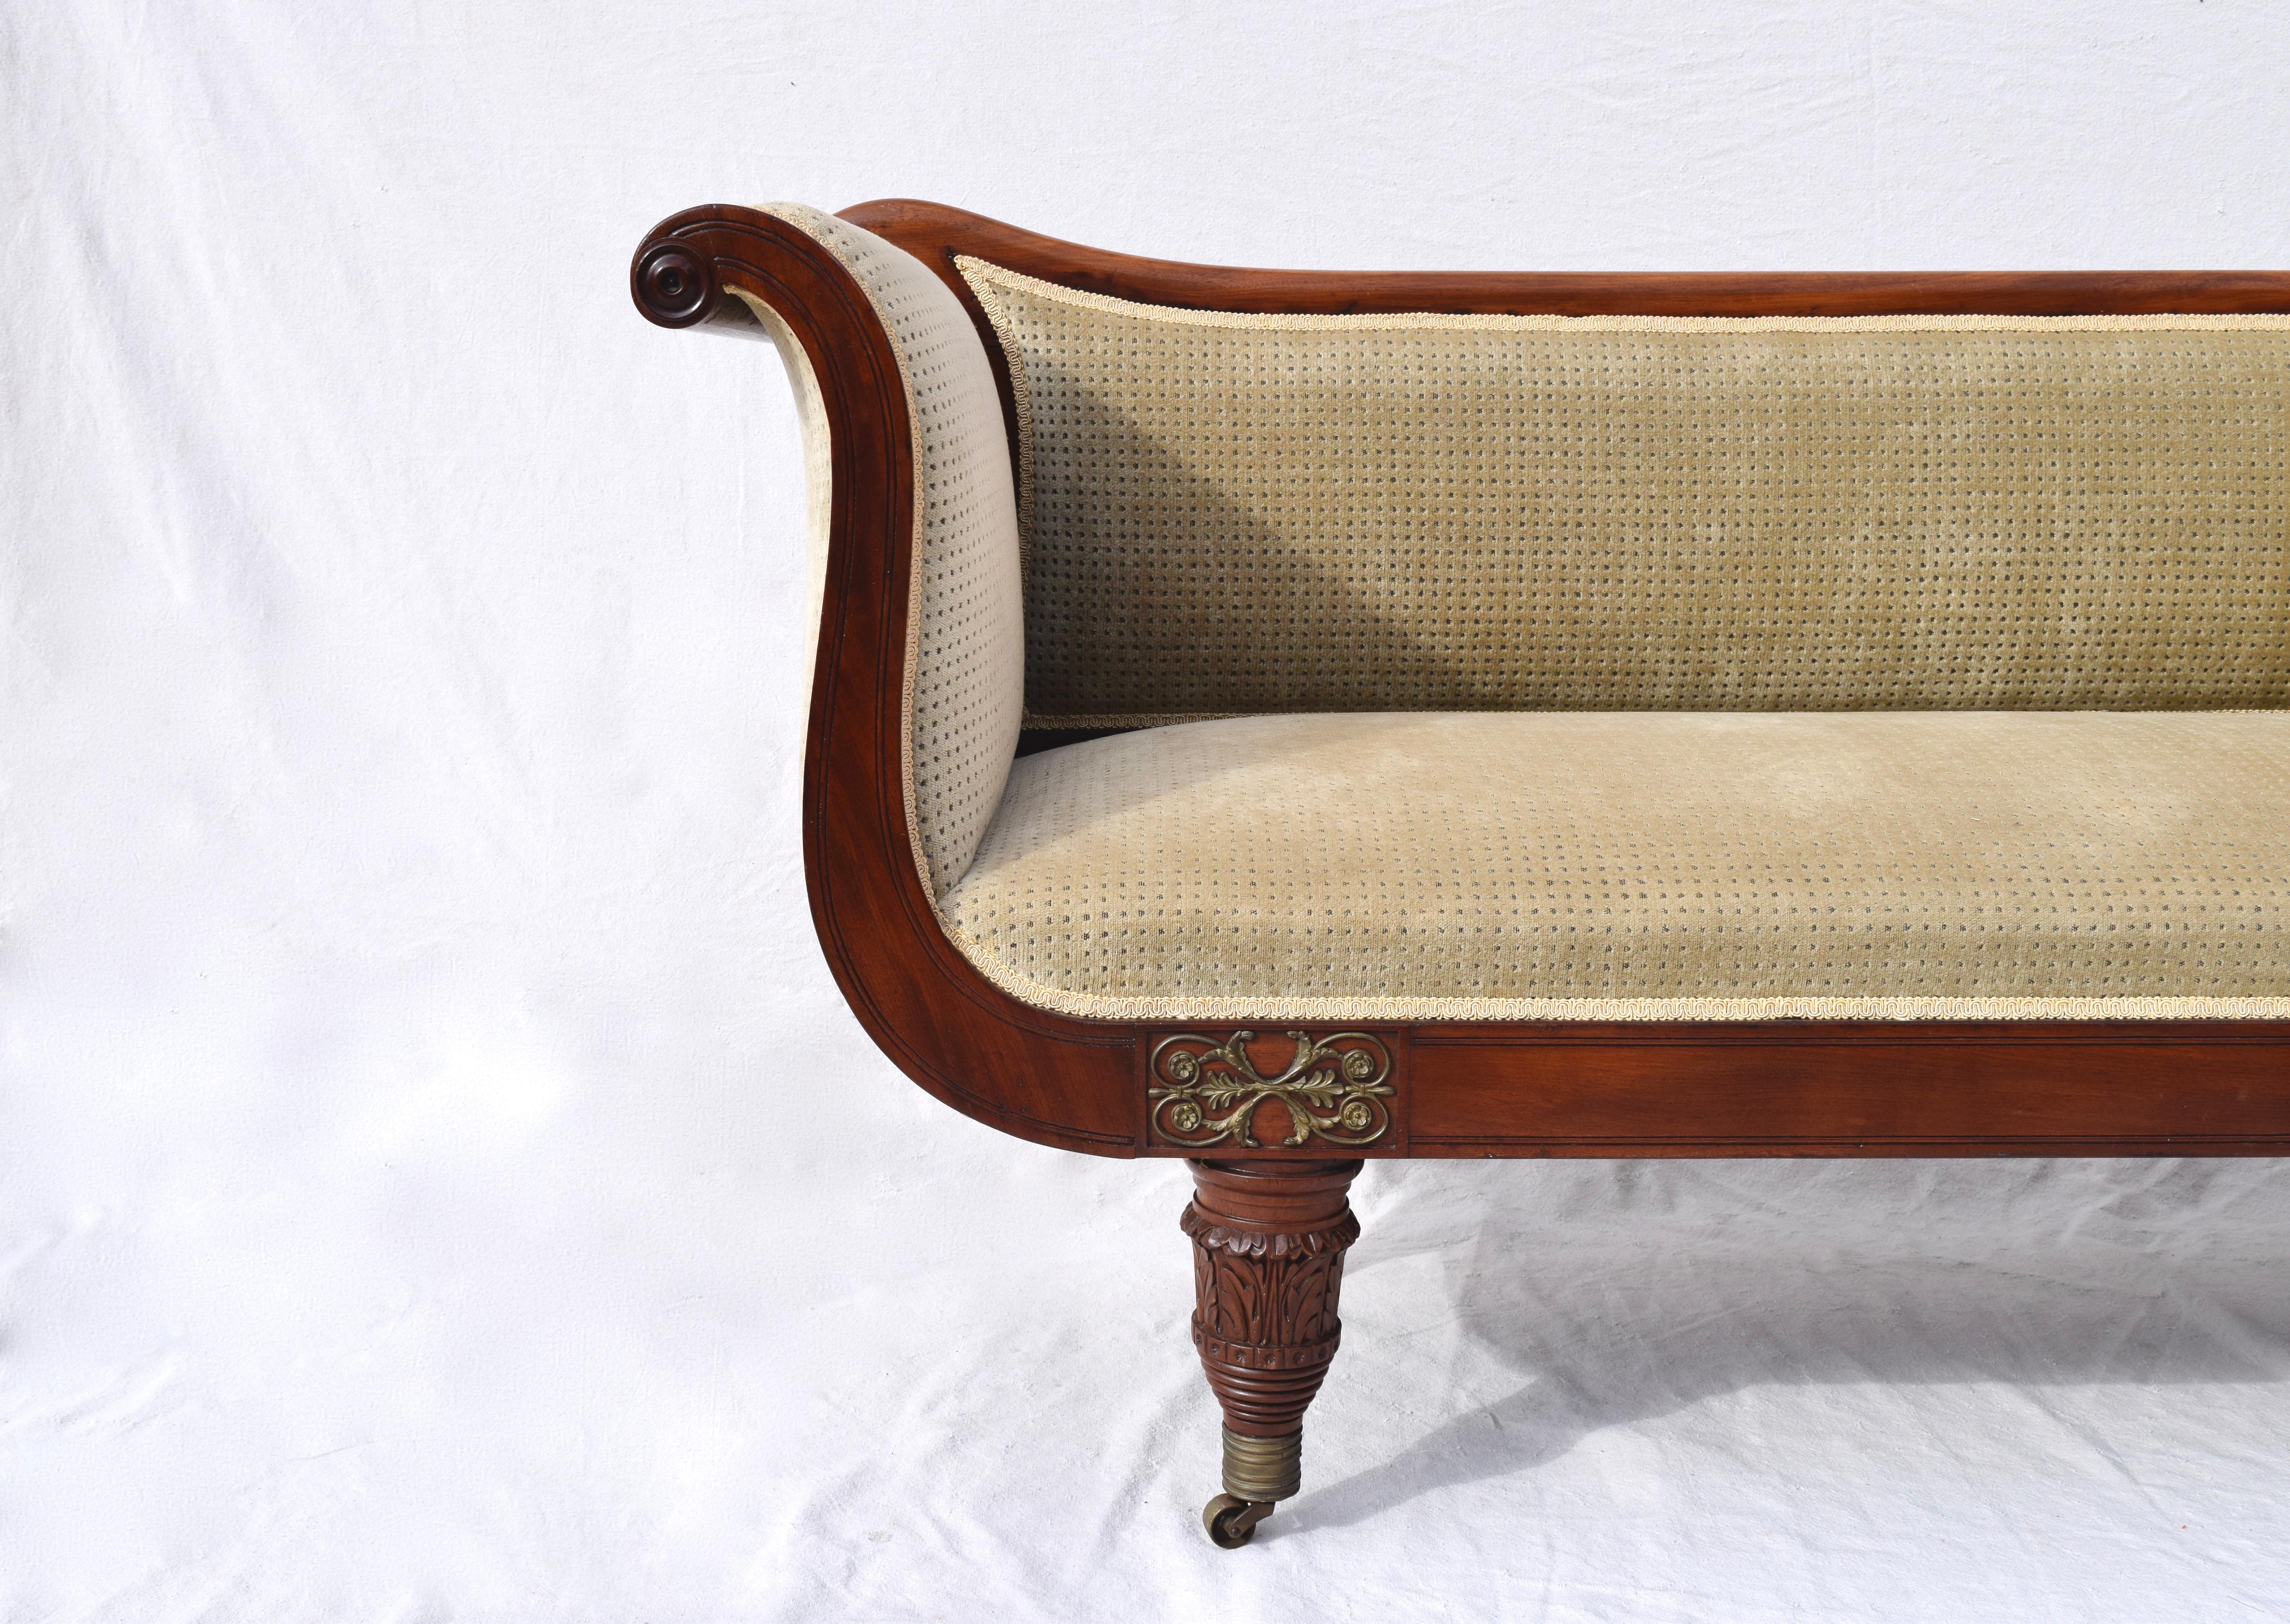 Elegant early 19th century Regency mahogany sofa or settee with scroll ends standing on turned legs and brass casters.
Classical in decorative and architectural influences of the 18th century this period of Regency furniture owes much to the